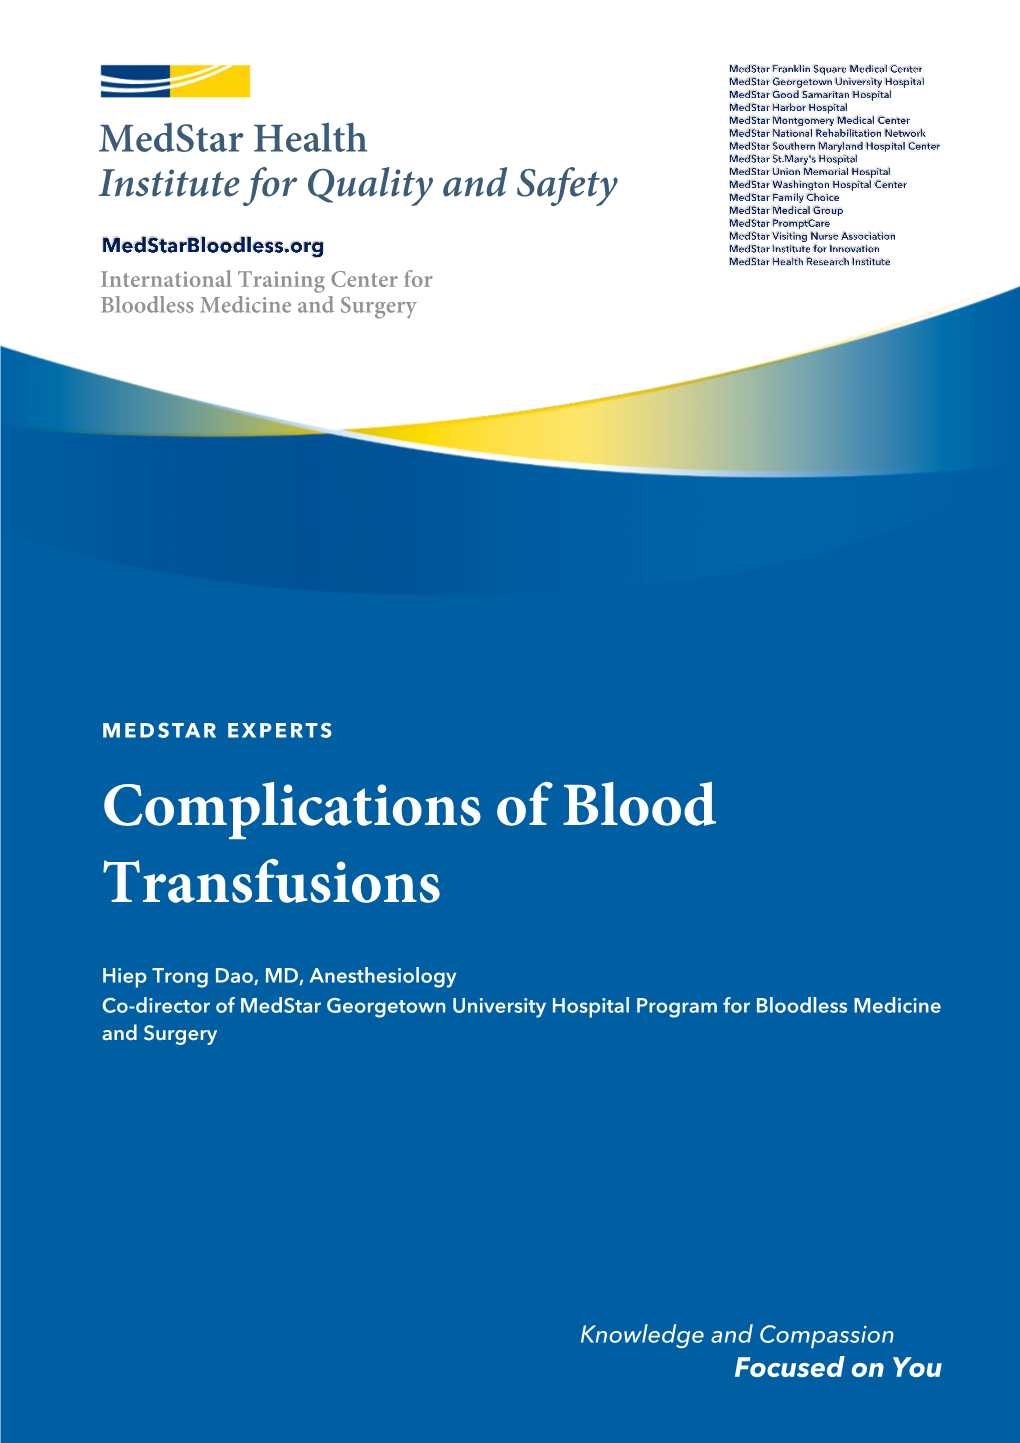 Complications of Blood Transfusions